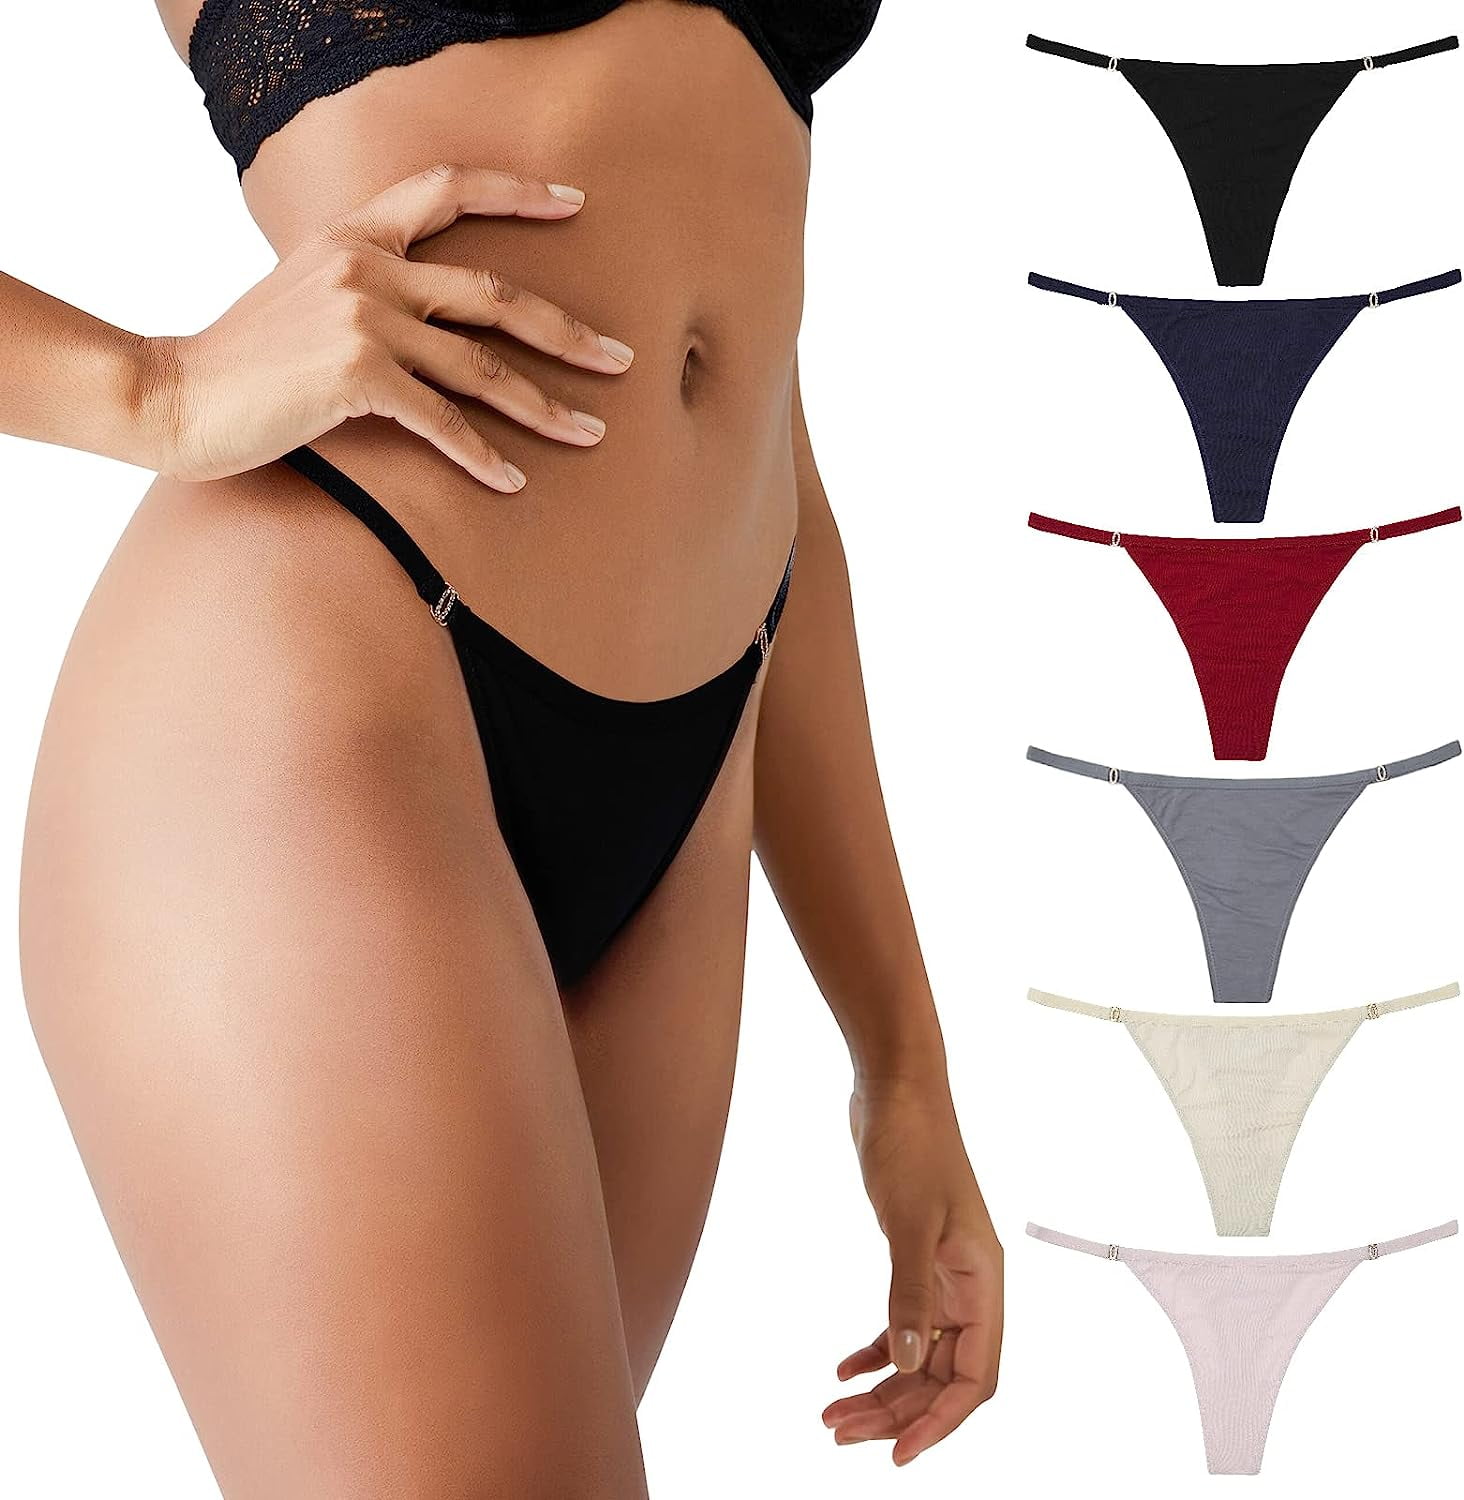 Sexy Cotton Lingerie T-back Thongs Pack of 4 Assorted Colors XS/S